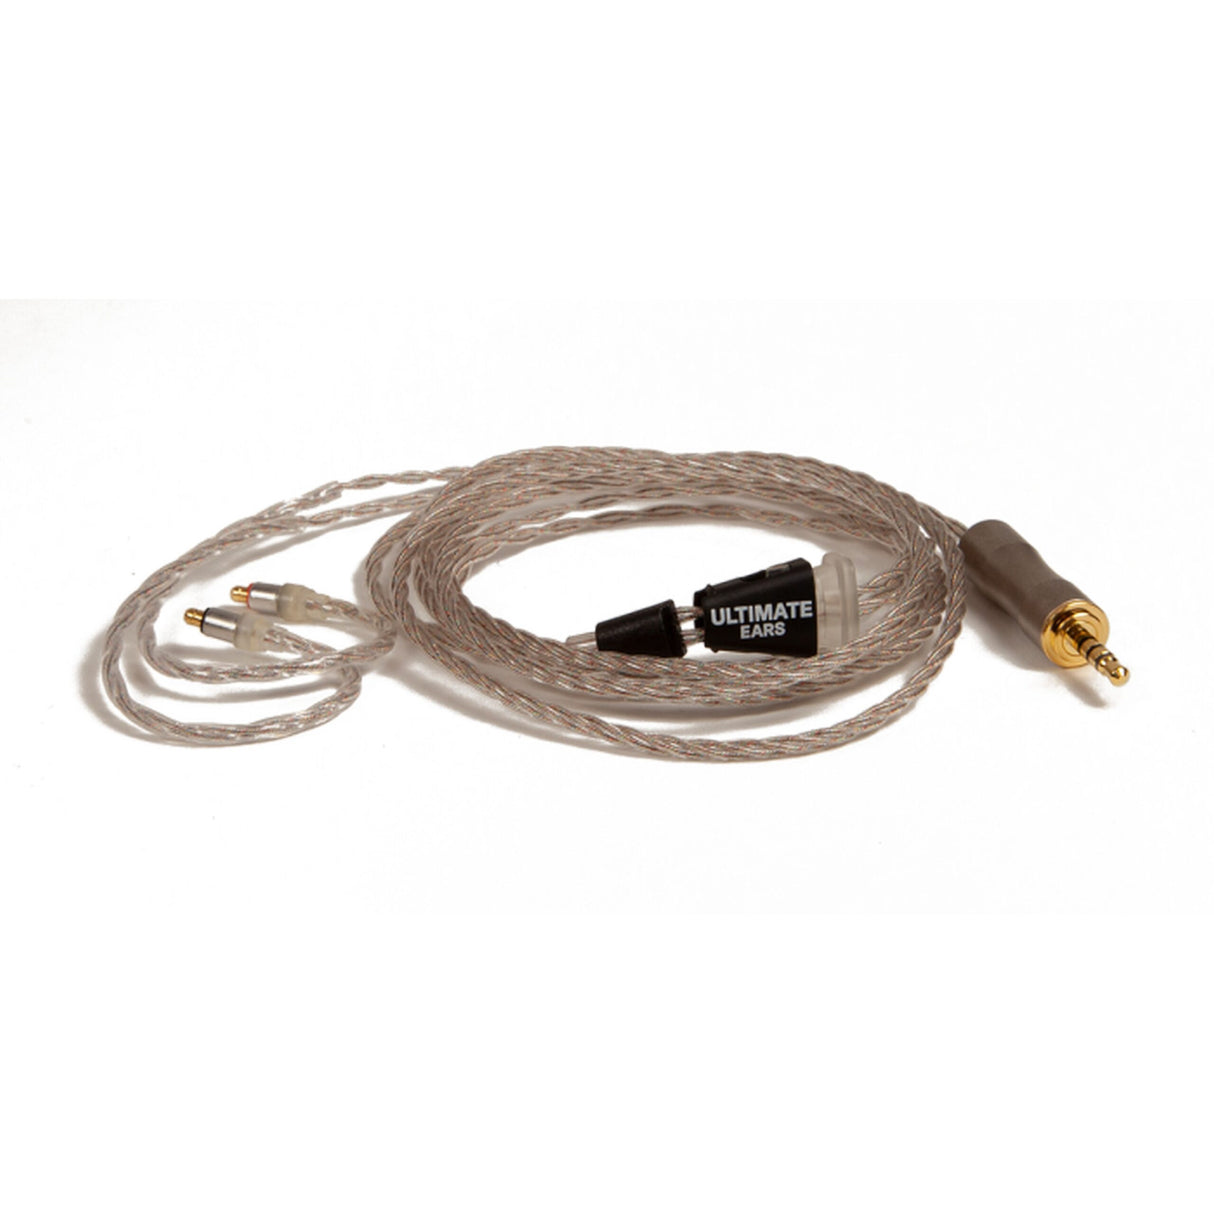 Ultimate Ears 50-Inch Balanced IPX Cable with Earloop 2.5mm